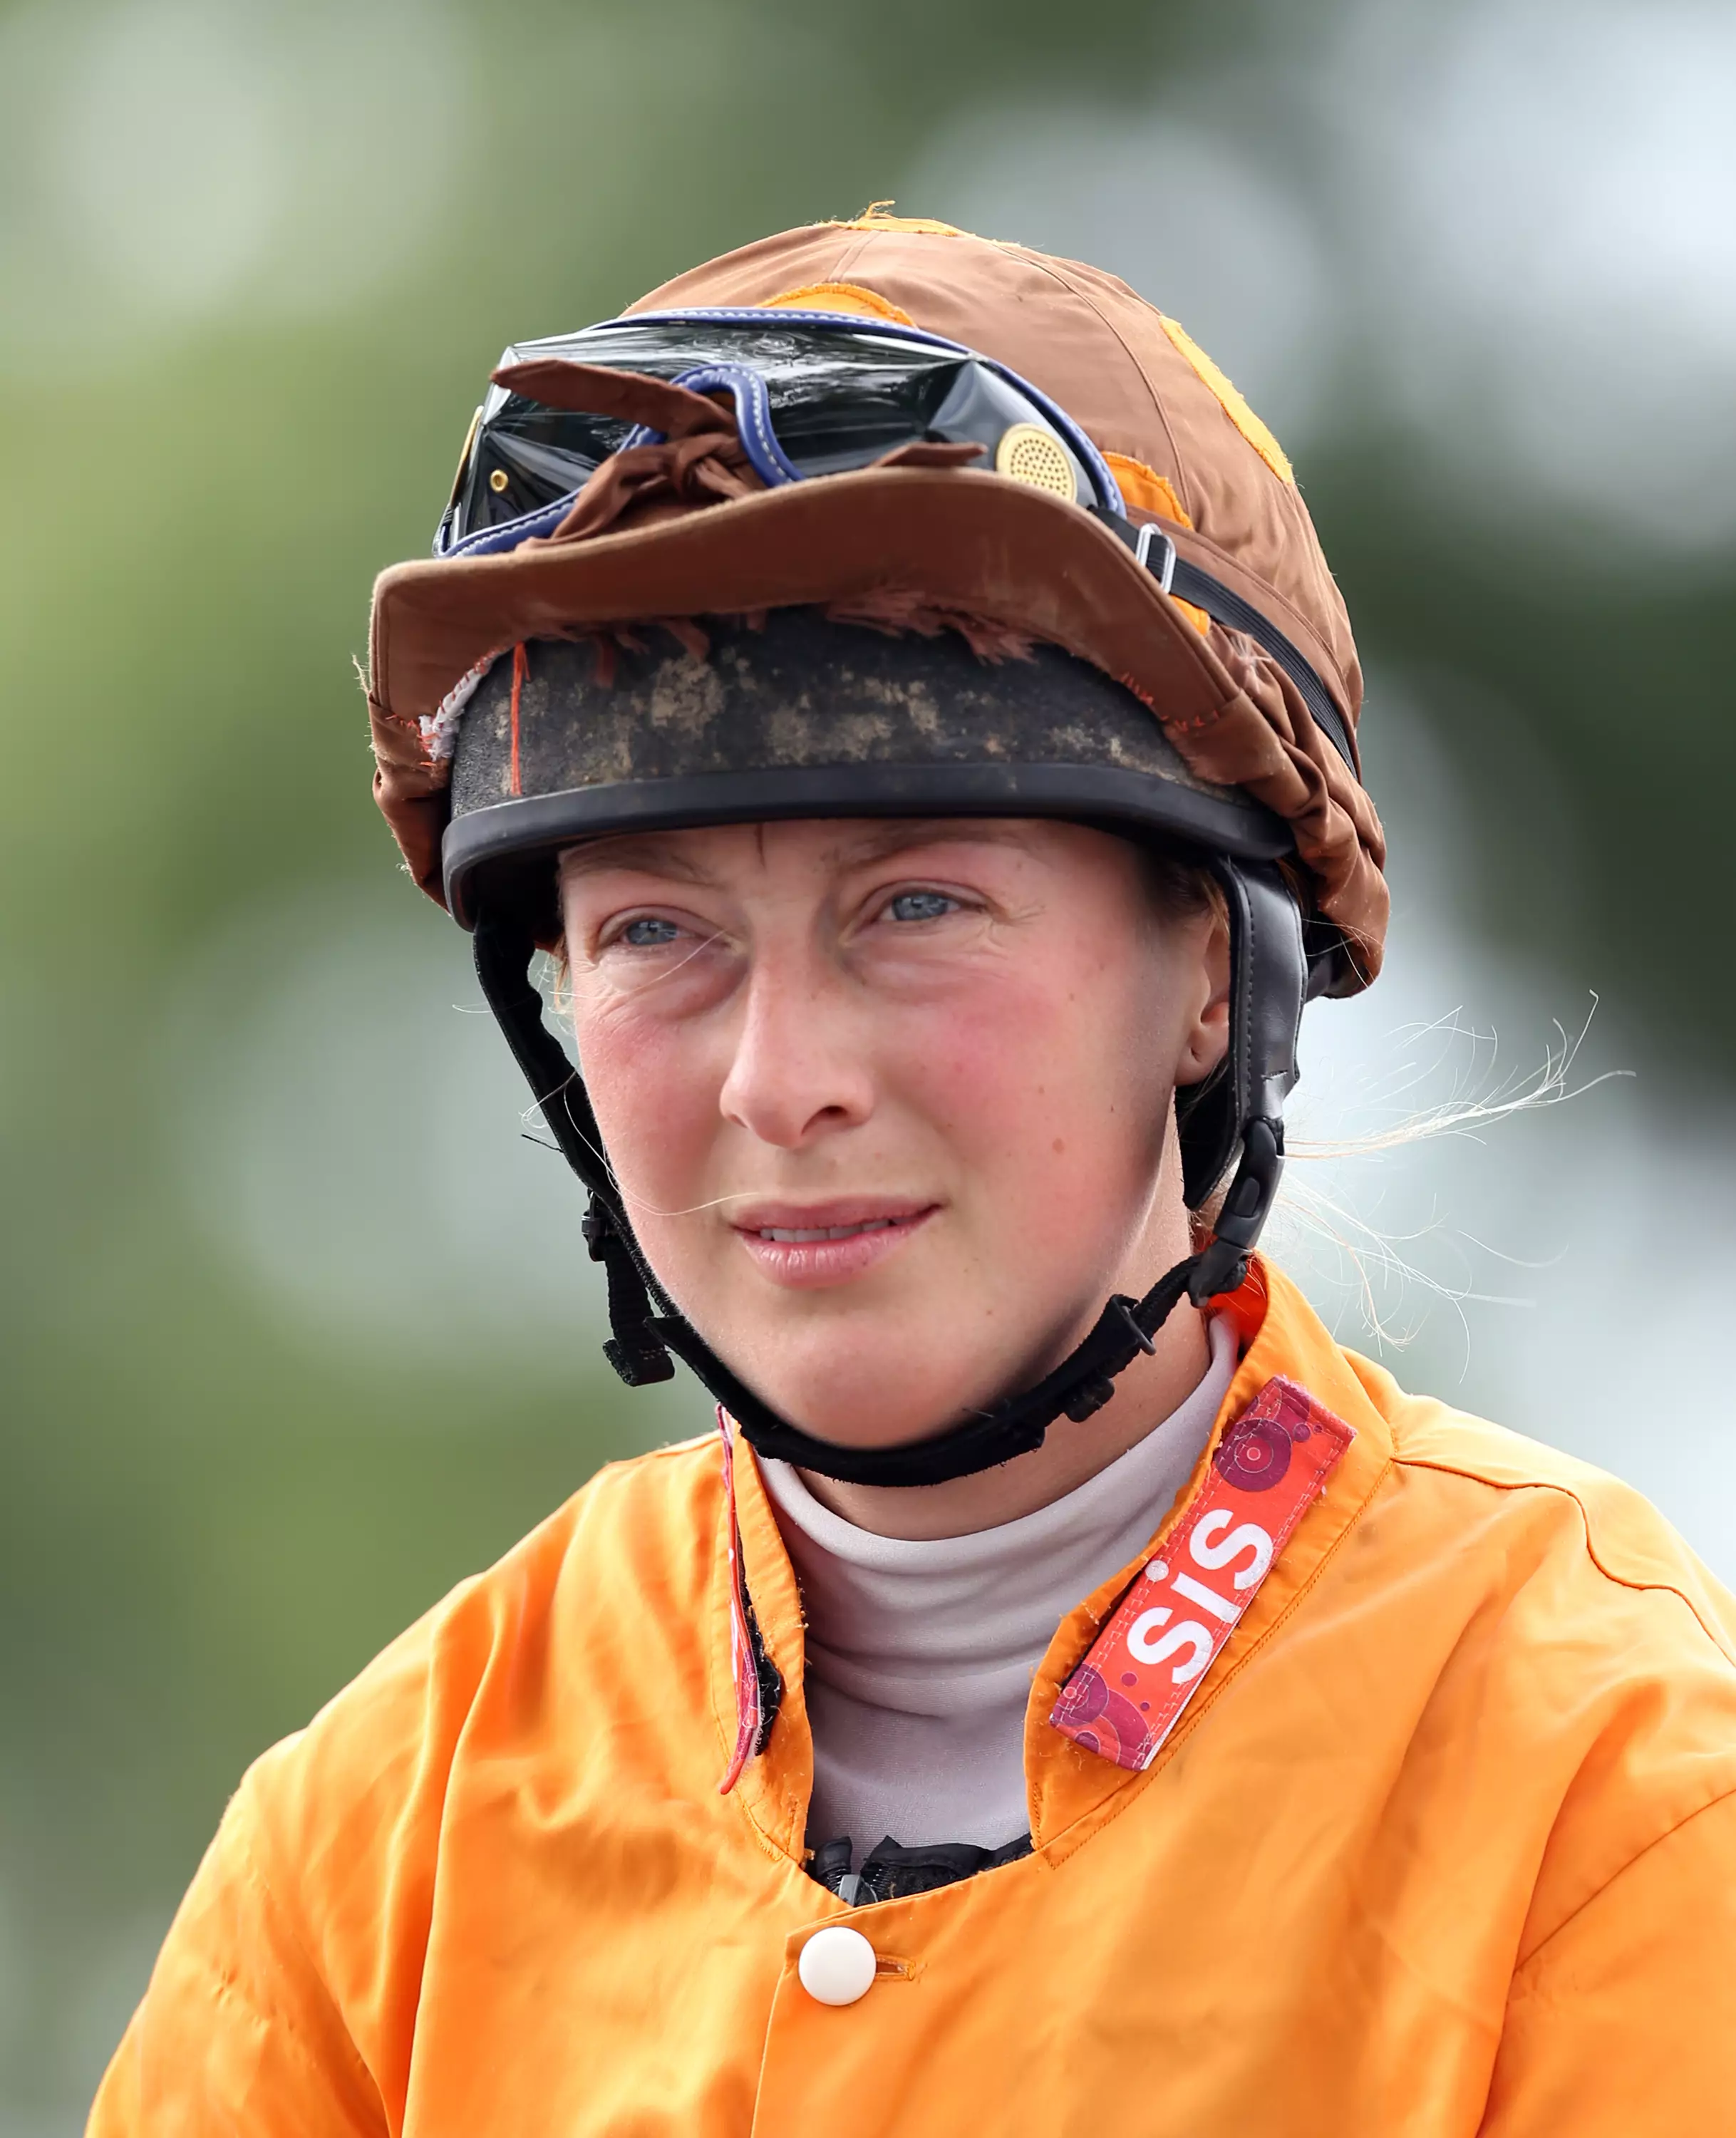 Brooke, who rode with a 7lb claim, competed in more than 400 races since 2000